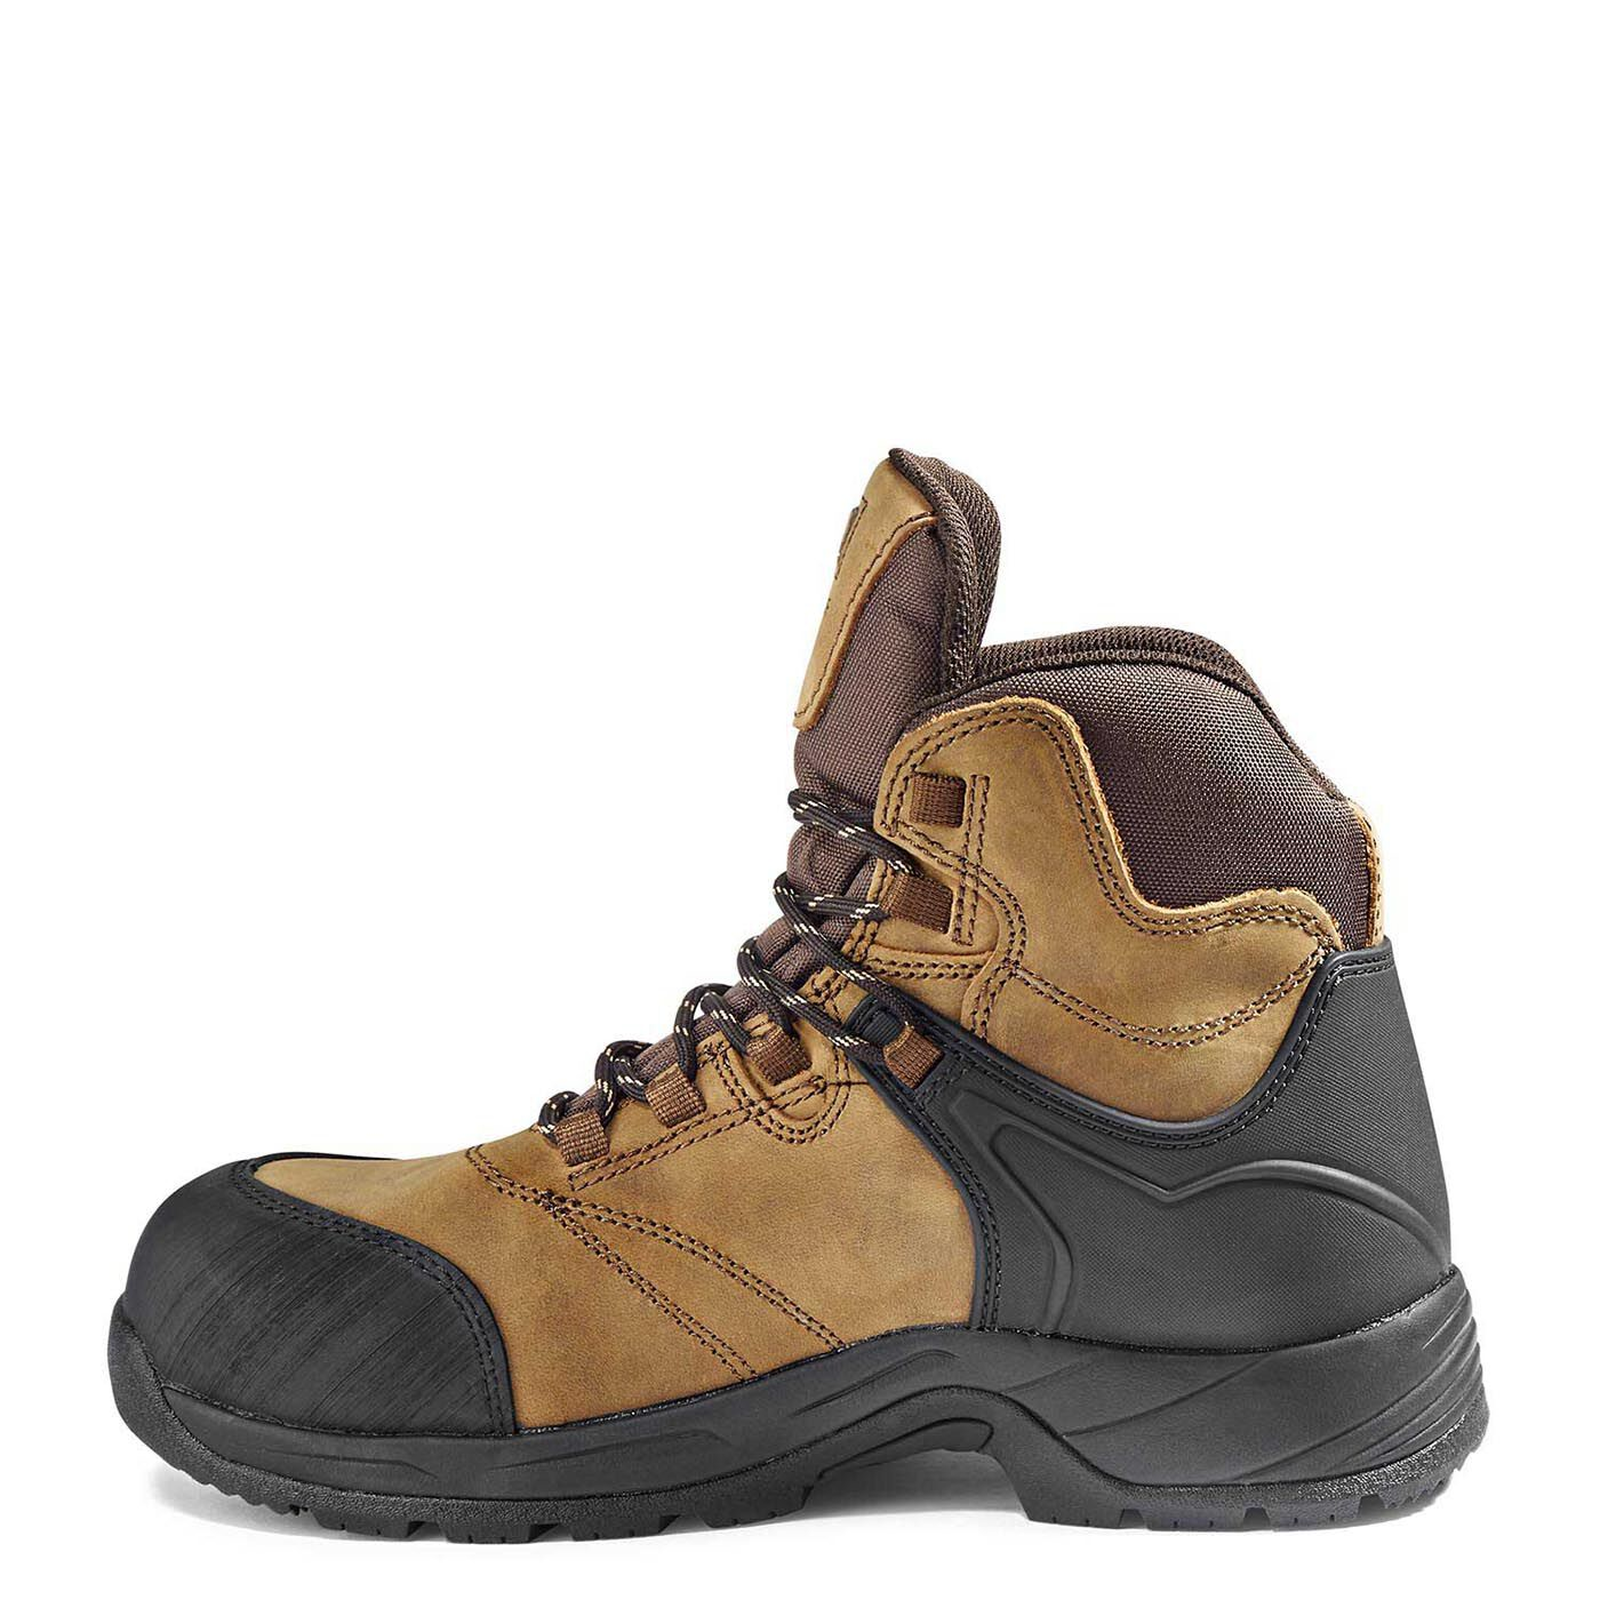 Kodiak Men's Journey Waterproof Hiker Safety Work Boots with Composite Toe from Columbia Safety